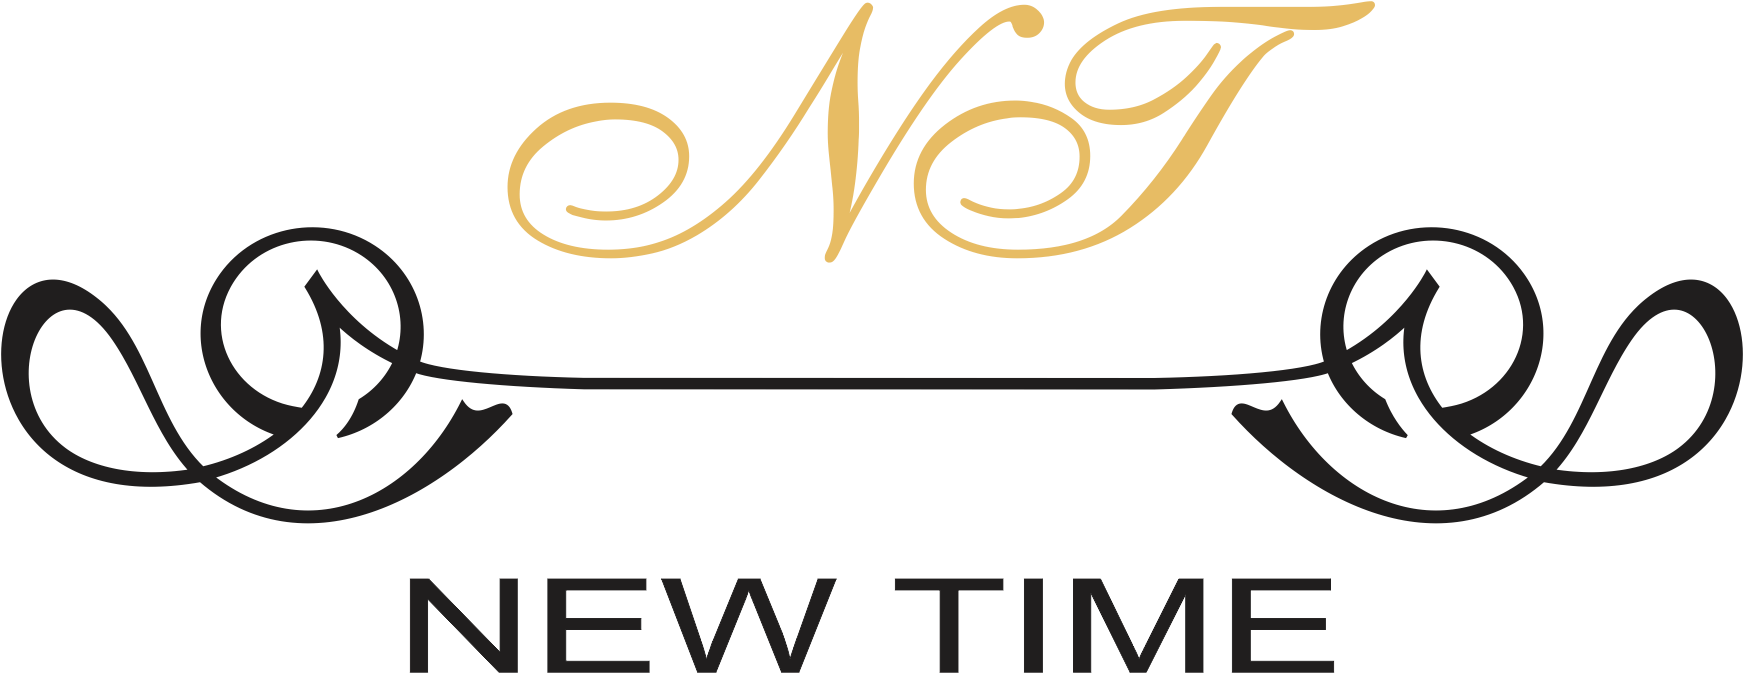 Download Michael Kors - New Time PNG Image with No Background 